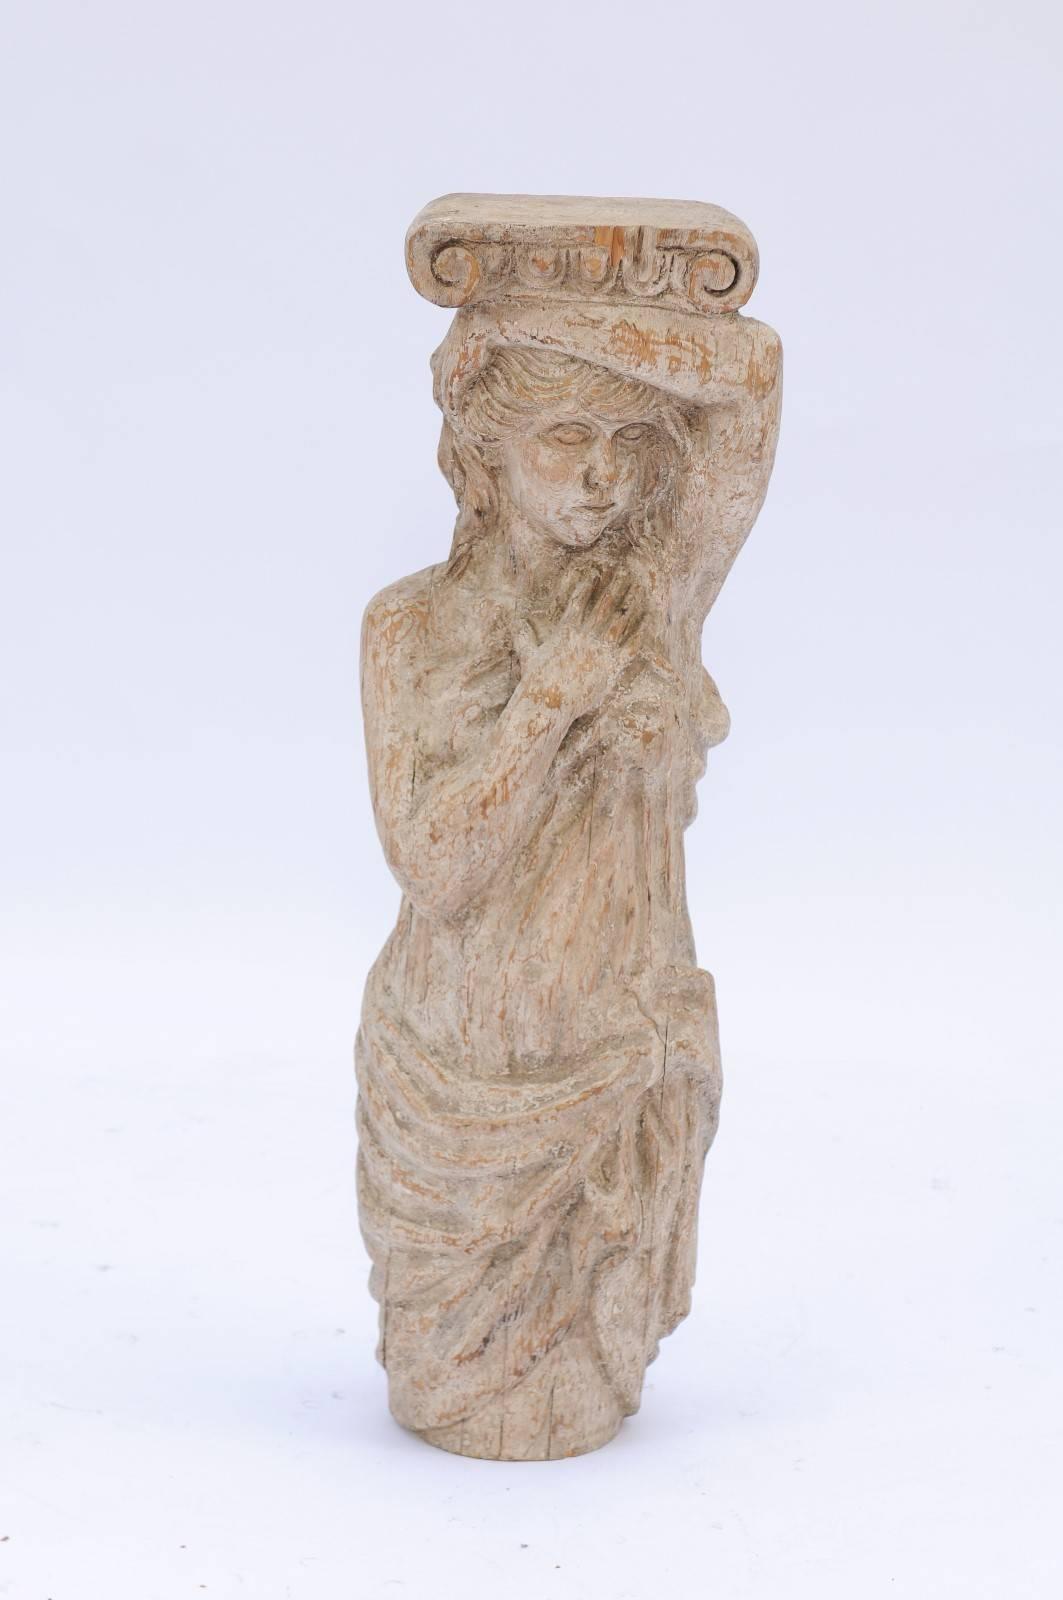 A French 18th century wooden carved statue of a woman. This French sculpture from the 18th century features a Greco-Roman lady elegantly raising her left arm above her head while her right hand is touching her hair. Her tunic drapes her Silhouette